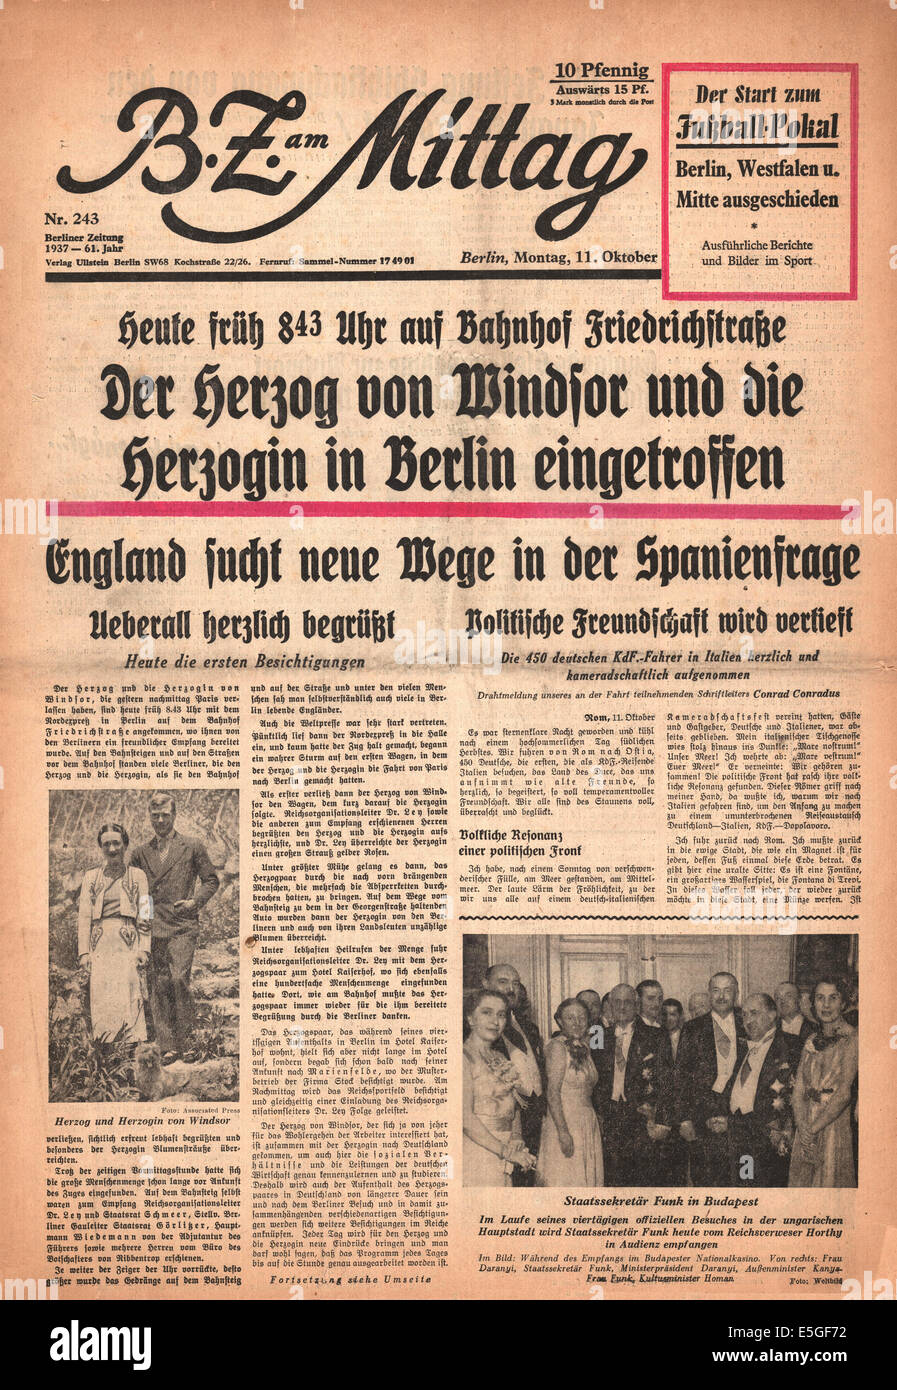 1937 Berliner Zeitung front page reporting Duke and Duchess of Windsor  visit to Germany Stock Photo - Alamy